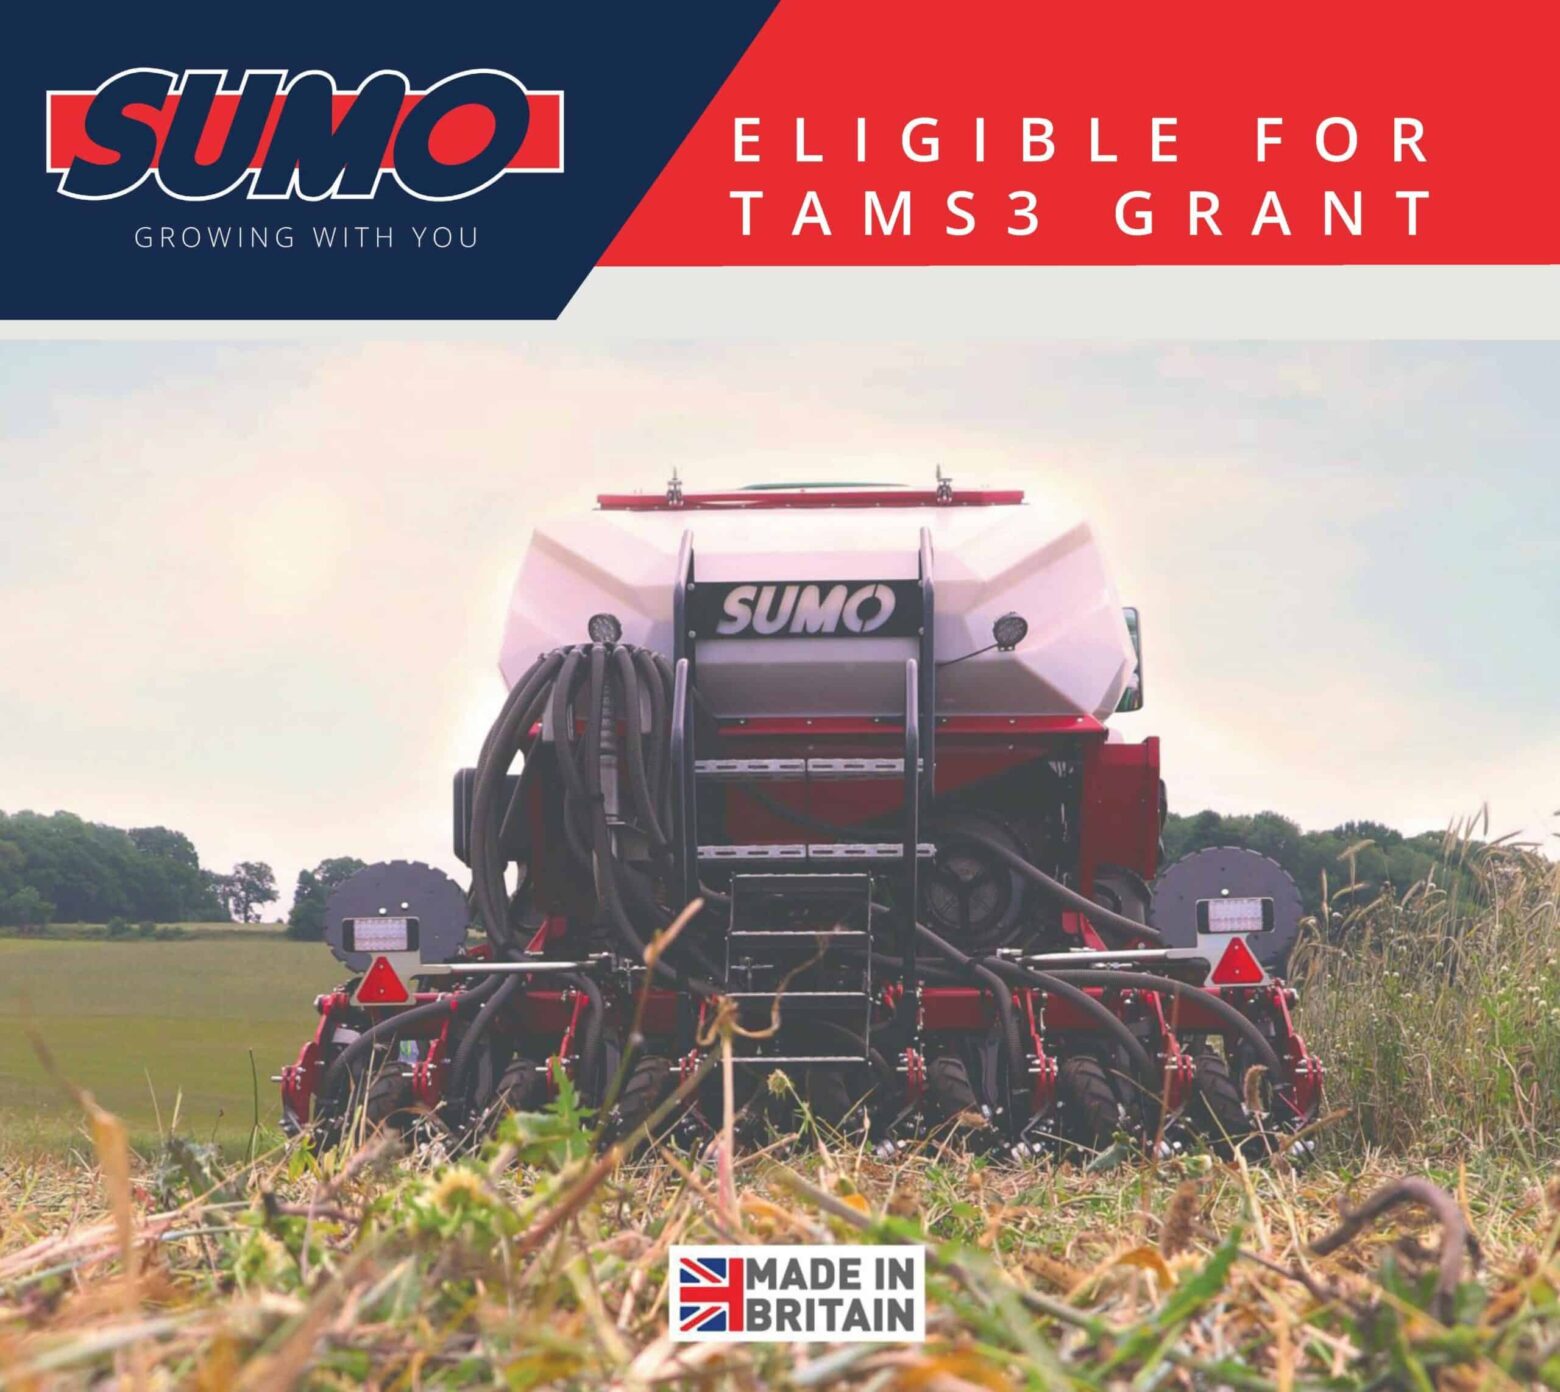 FARM BUSINESS GRANTS AVAILABLE IN IRELAND – SUMO PRODUCTS ELIGIBLE